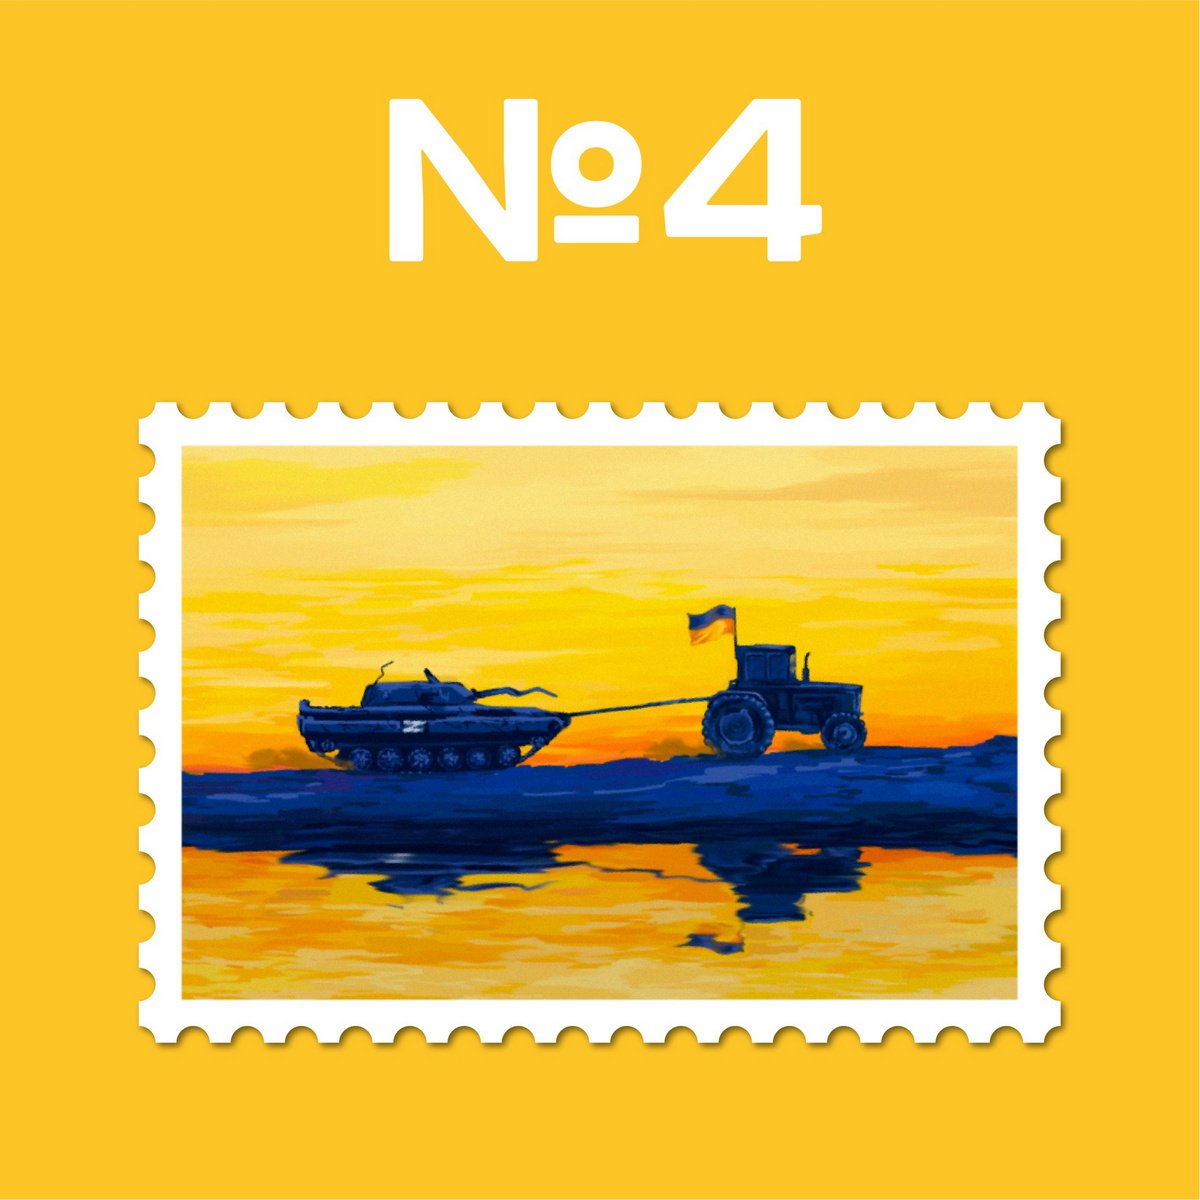 Voting for the best sketch of the postage stamp Good evening, we are from Ukraine! has started